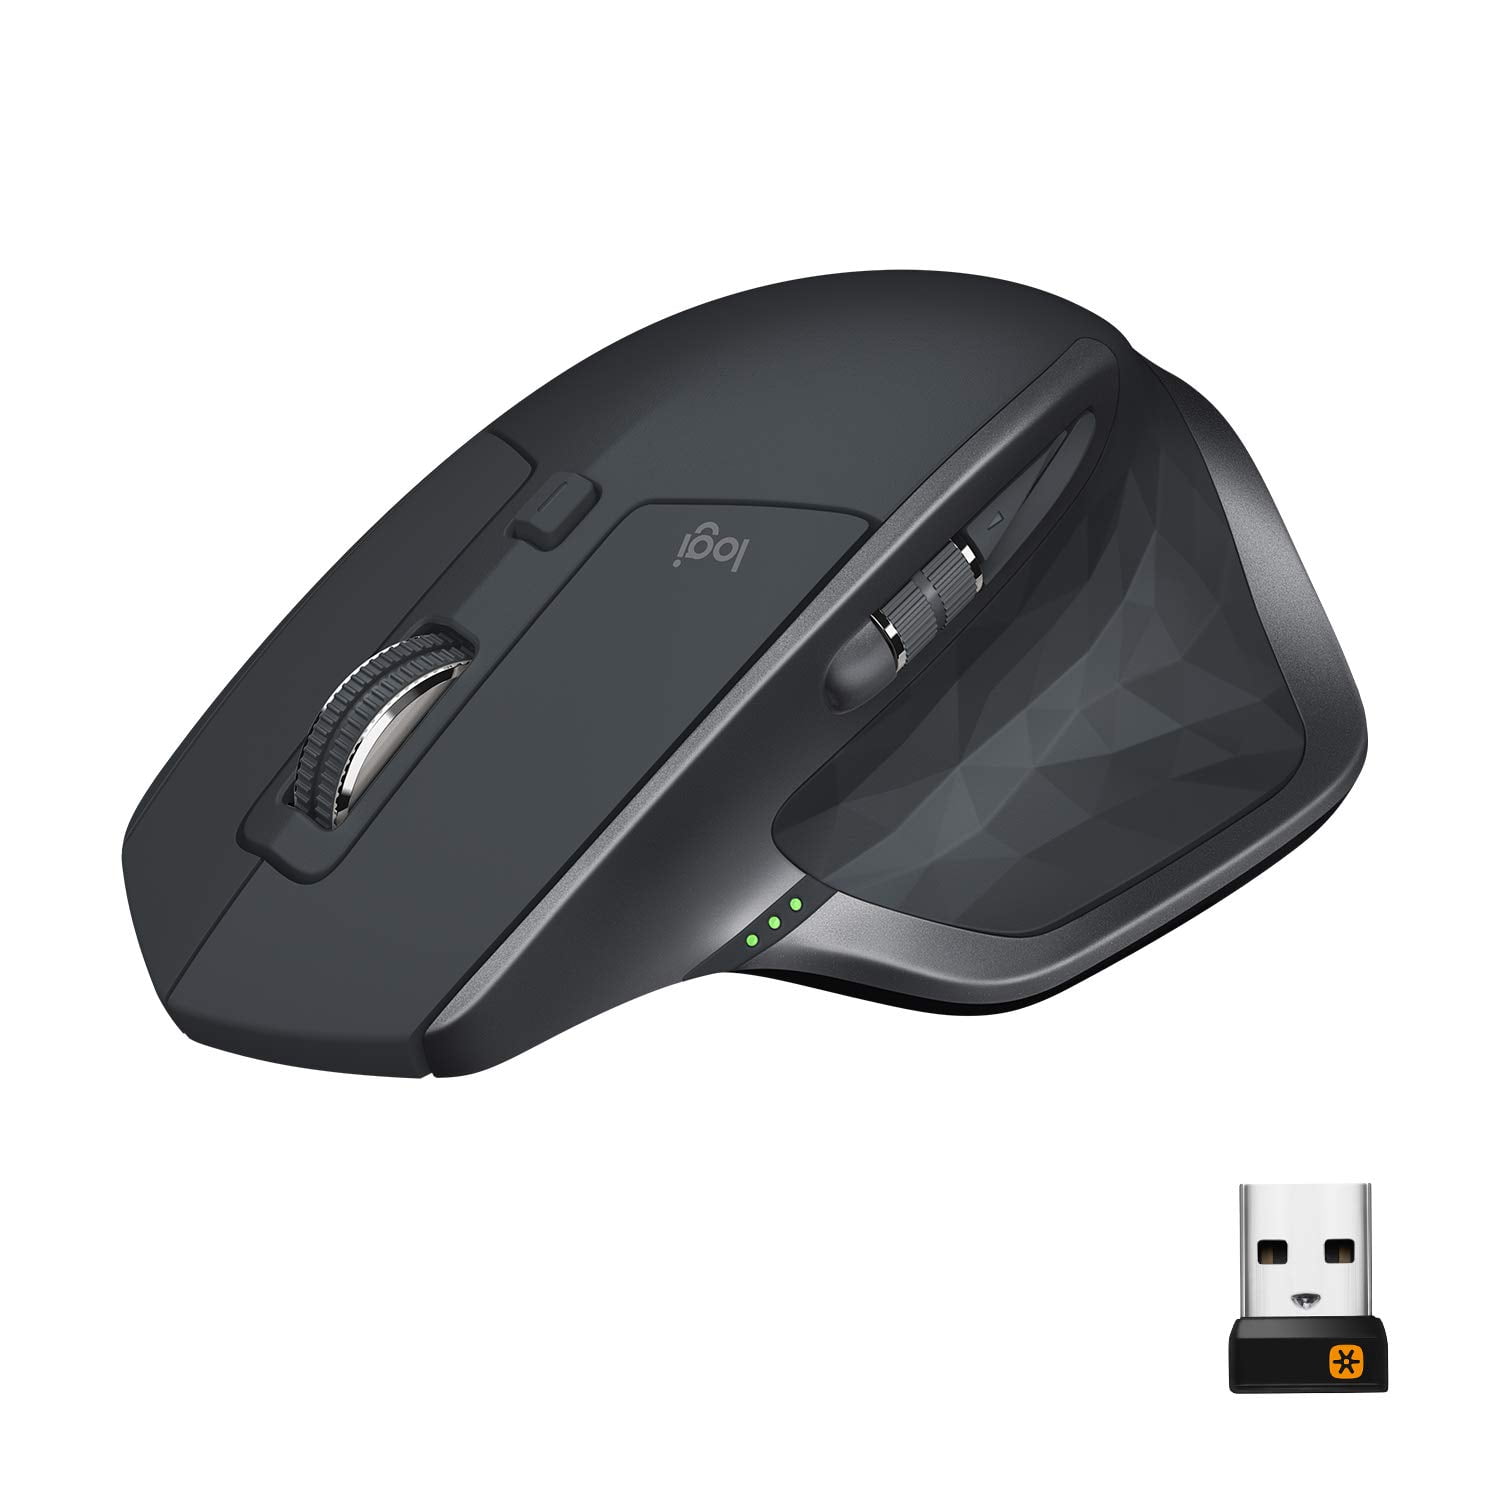 Logitech MX Master 2S Wireless Mouse – Use on Any Surface, Hyper-fast Scrolling, Ergonomic Rechargeable, Control up to Apple Mac and Windows Computers (Bluetooth USB), Graphite - Walmart.com